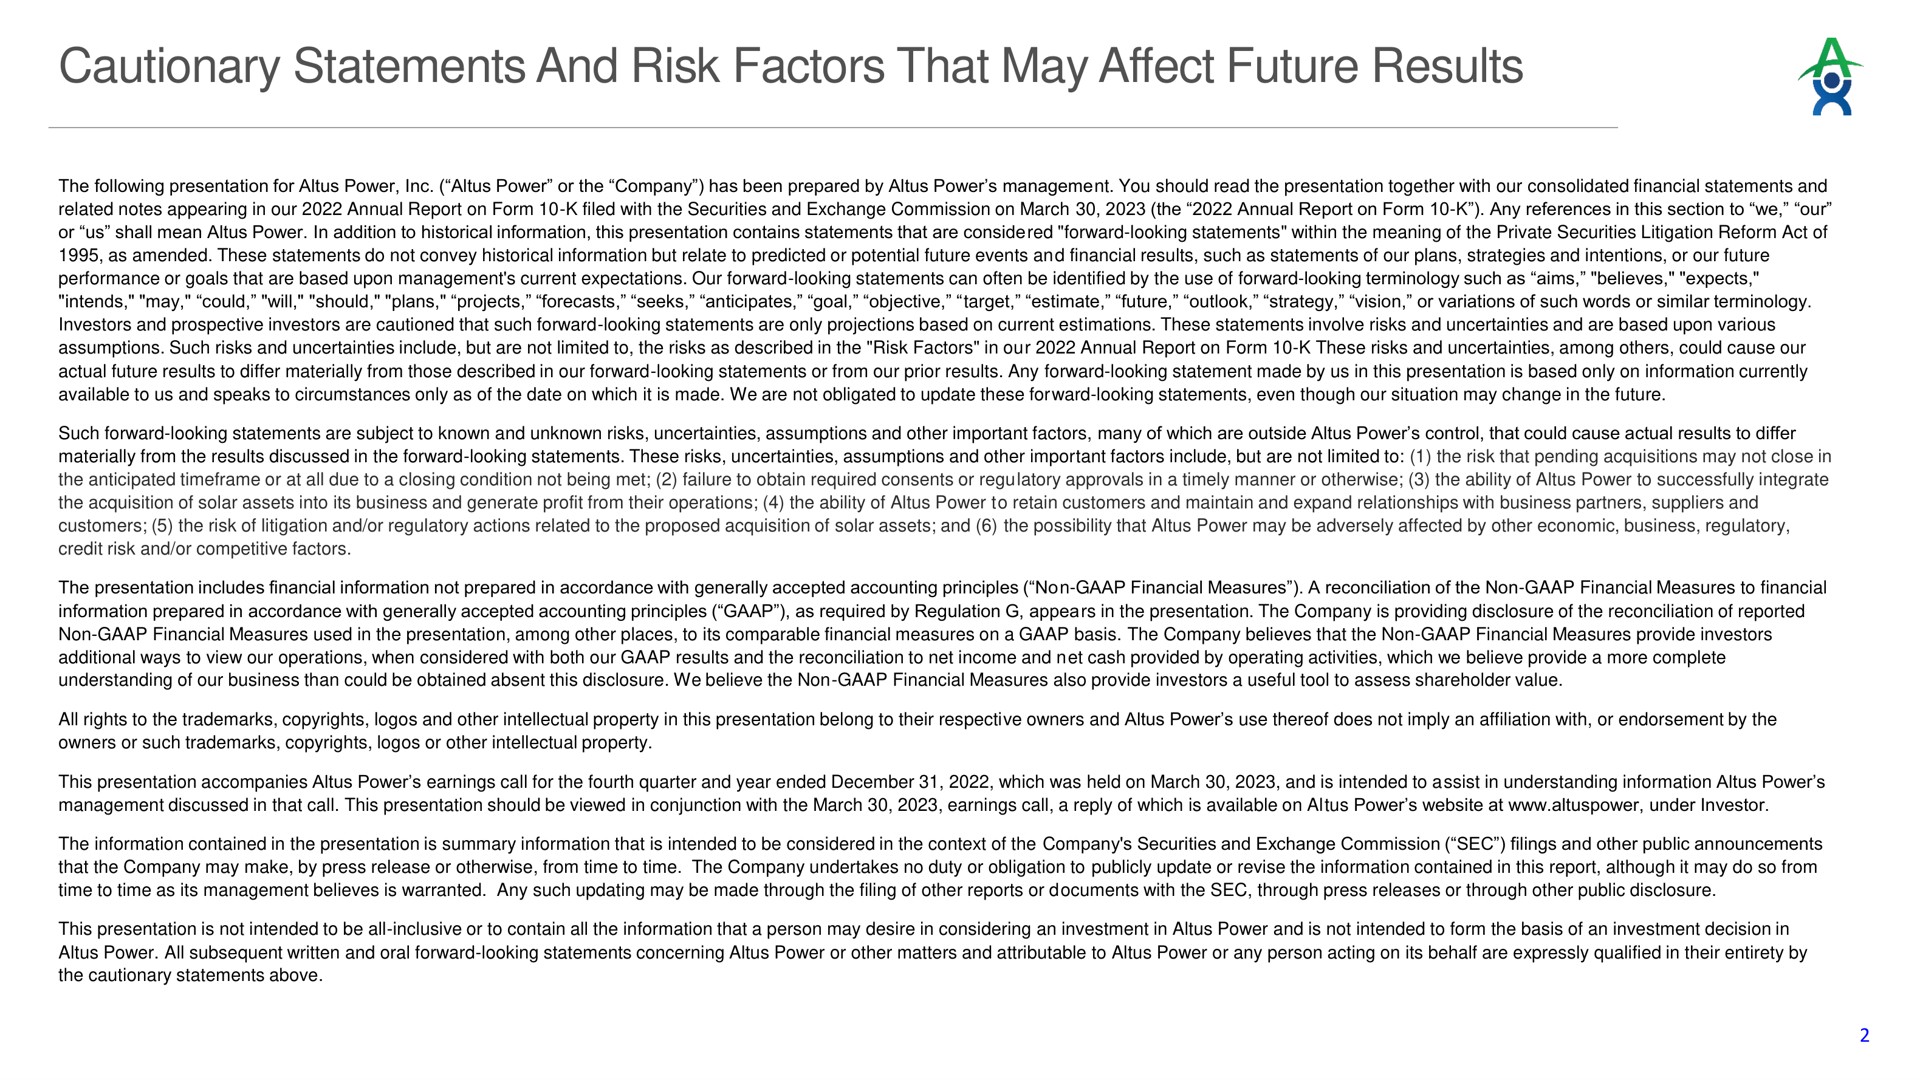 cautionary statements and risk factors that may affect future results | Altus Power